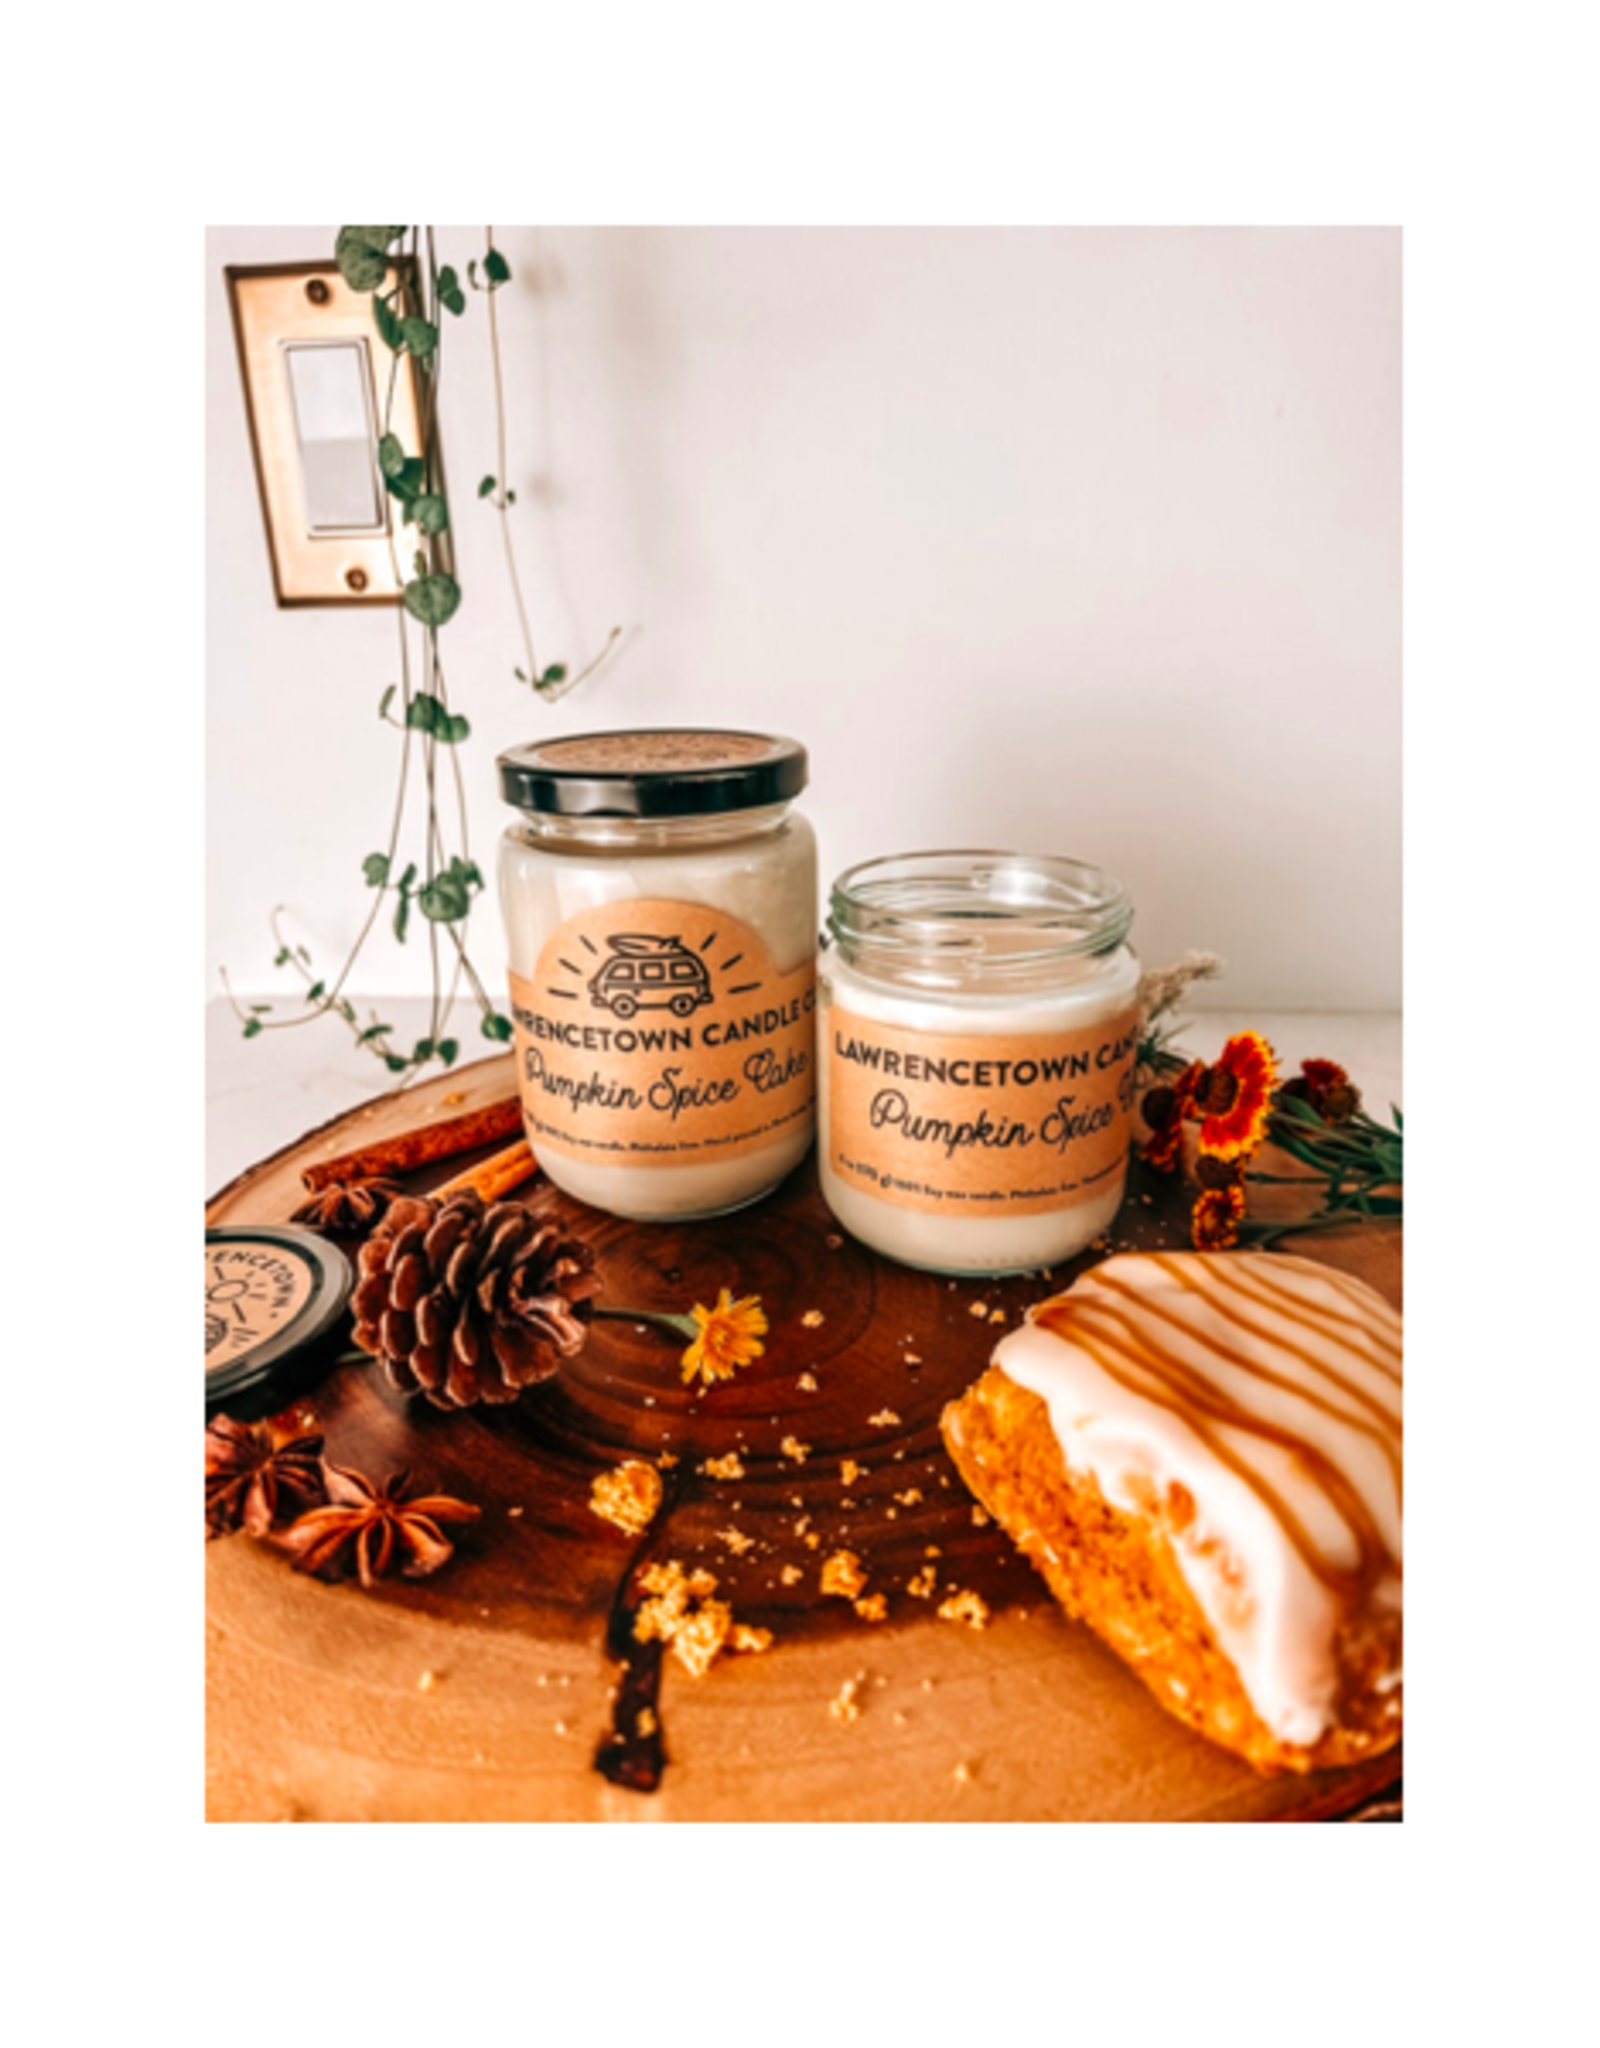 Lawrencetown Candle Co - Soy Candle / Pumpkin Spice Cake, 10oz